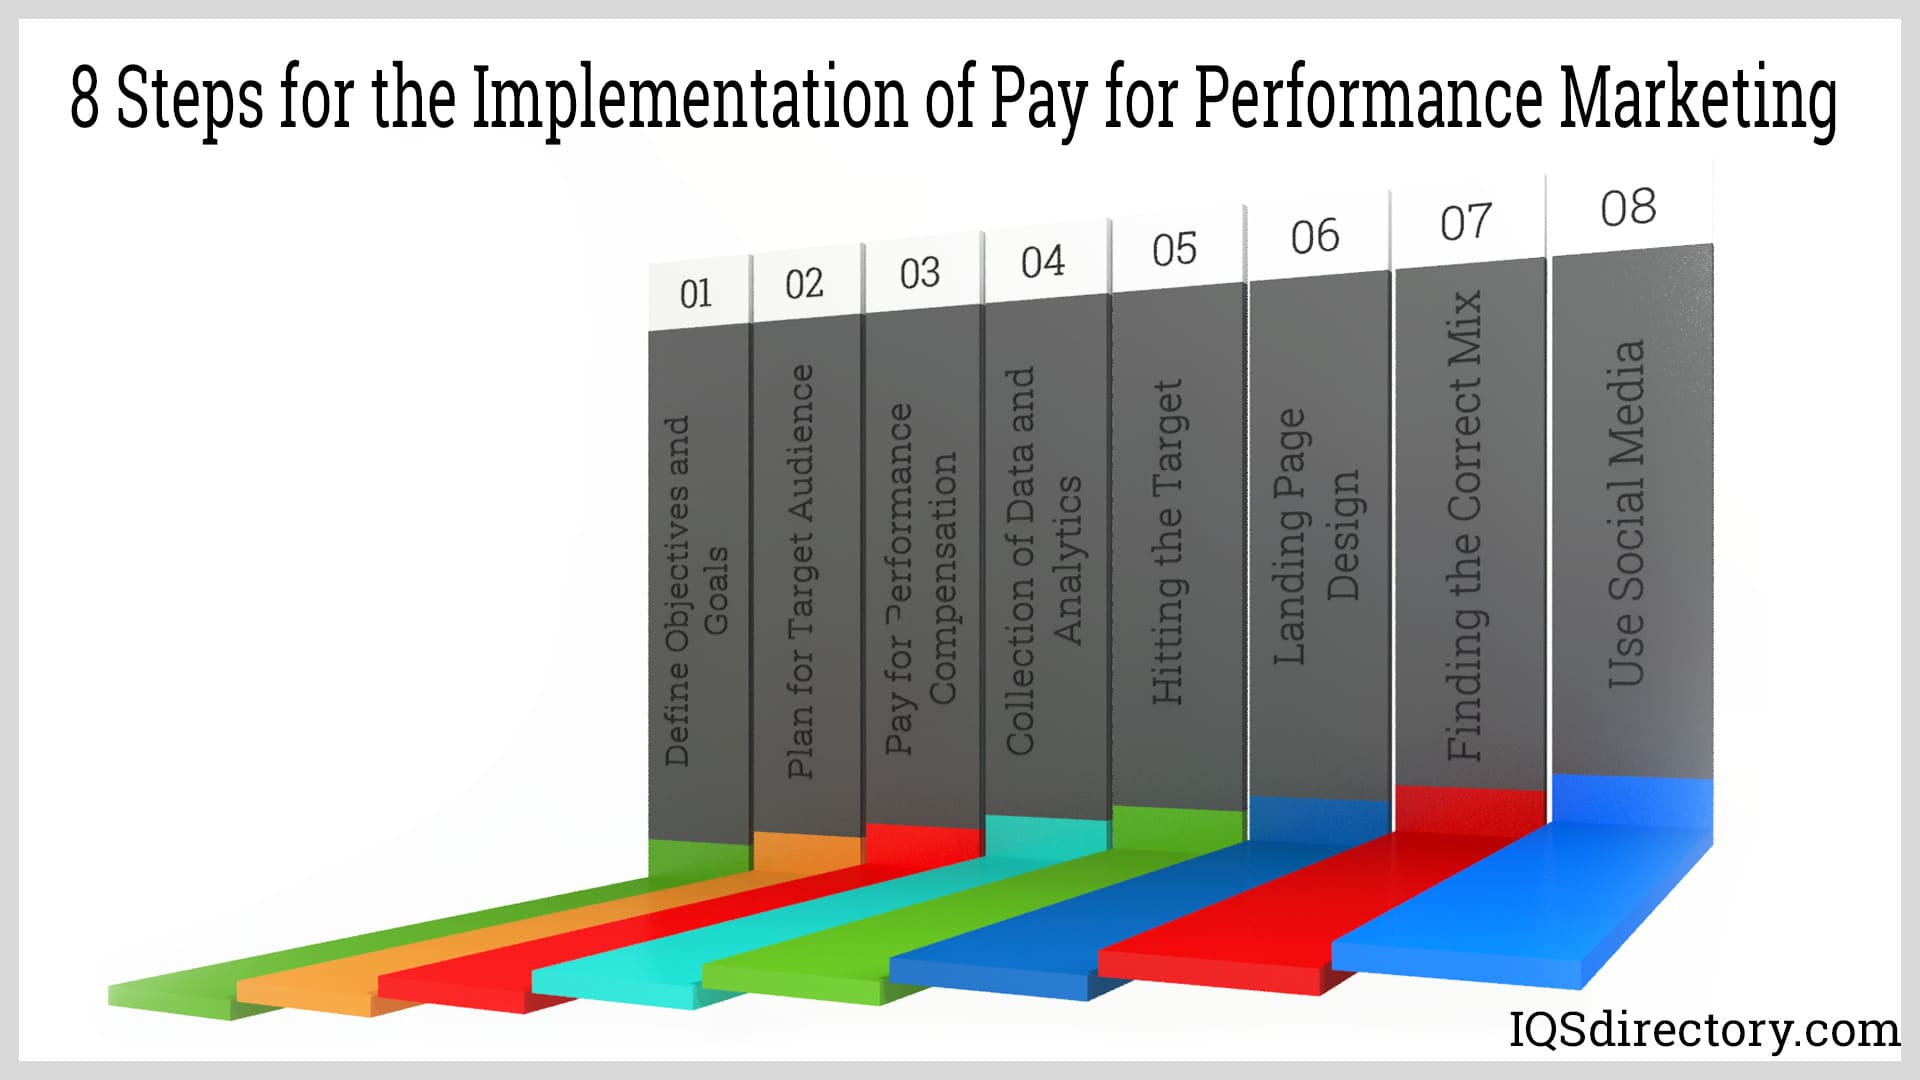 8 Steps for the Implementation of Pay for Performance Marketing